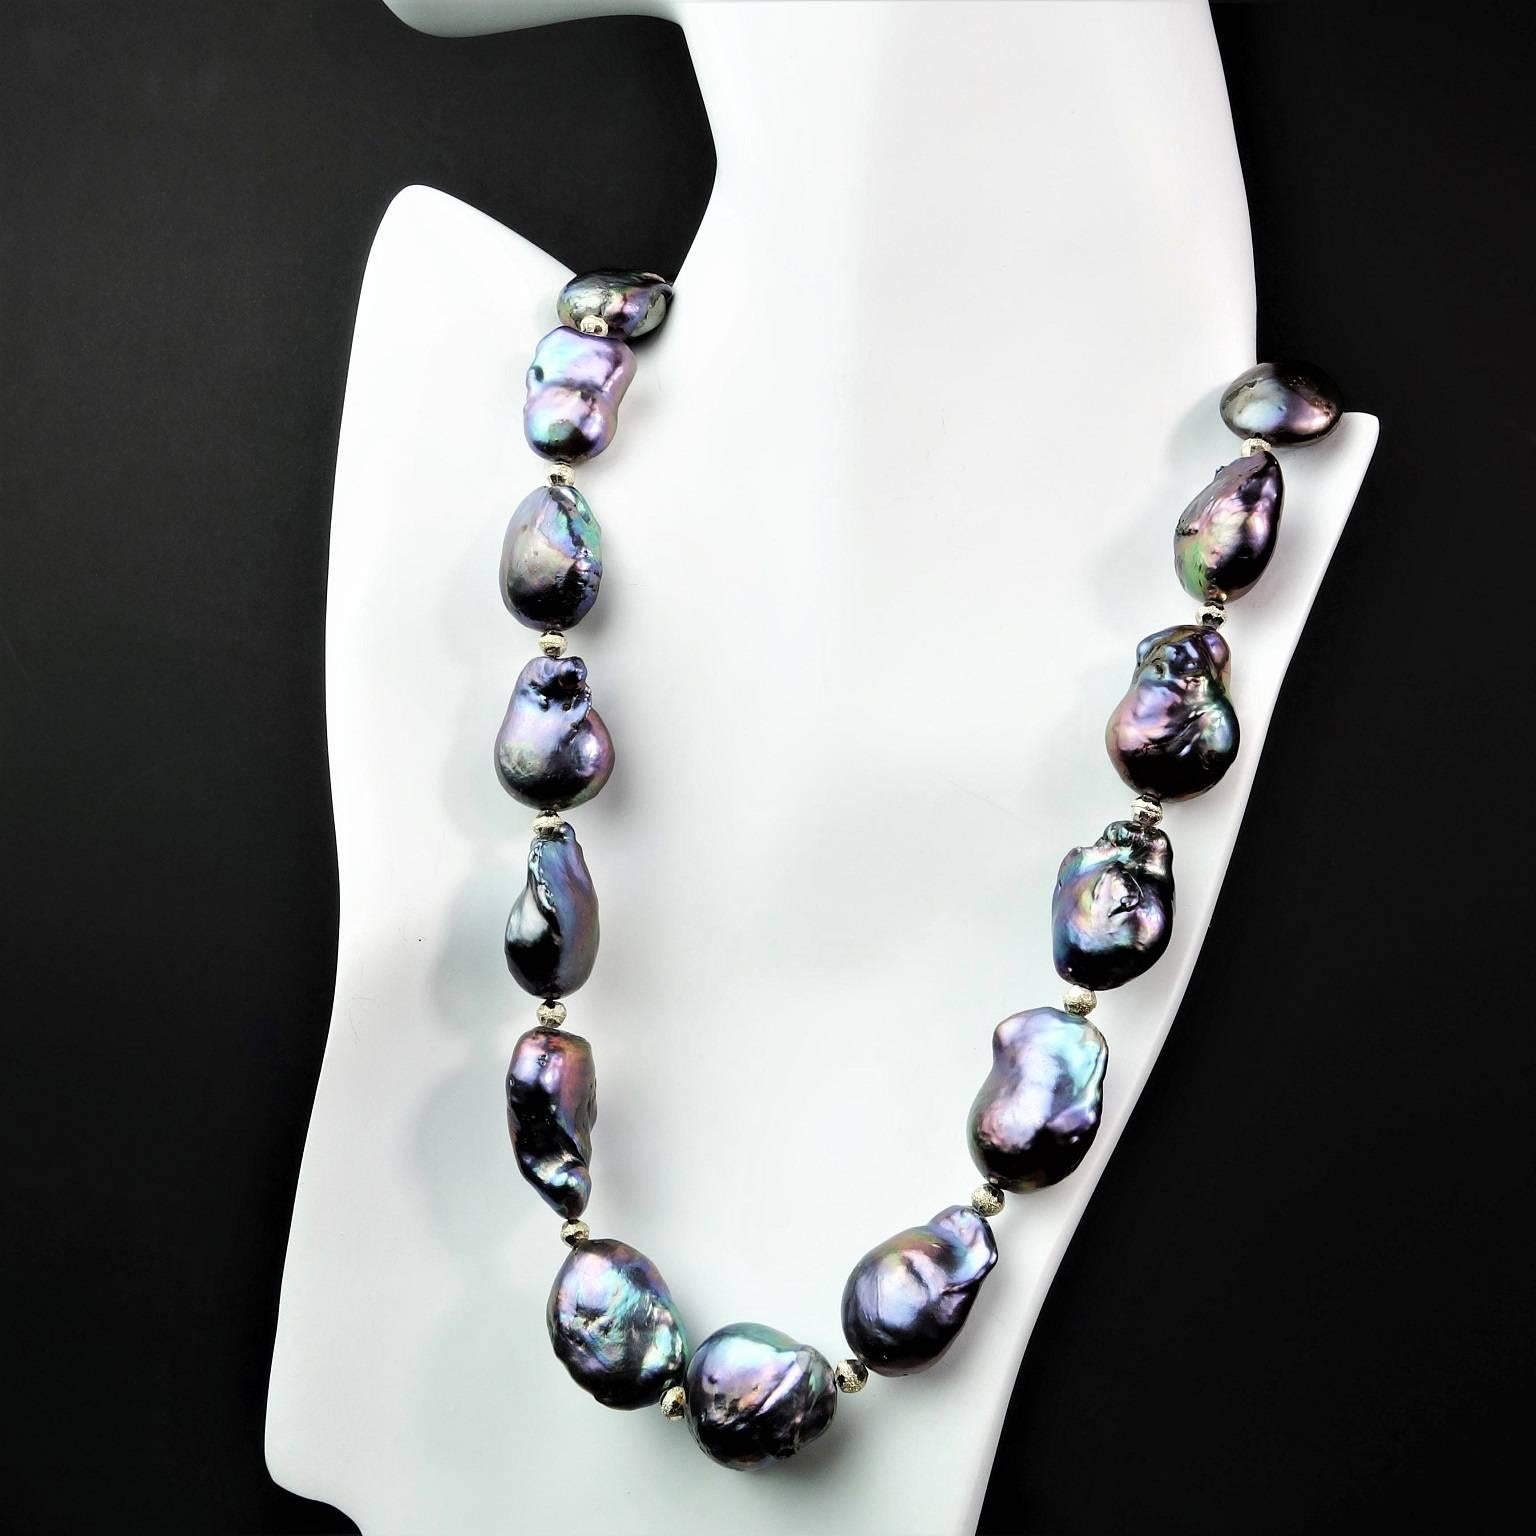 Natural pearlescent Lilac and Bluish Baroque Peacock Pearls with sparkly silver tone accents. Seed shows through the surface of one of the pearls, others are a bit imperfect, but the color is so fanatastic it makes up for having to adjust the pearls